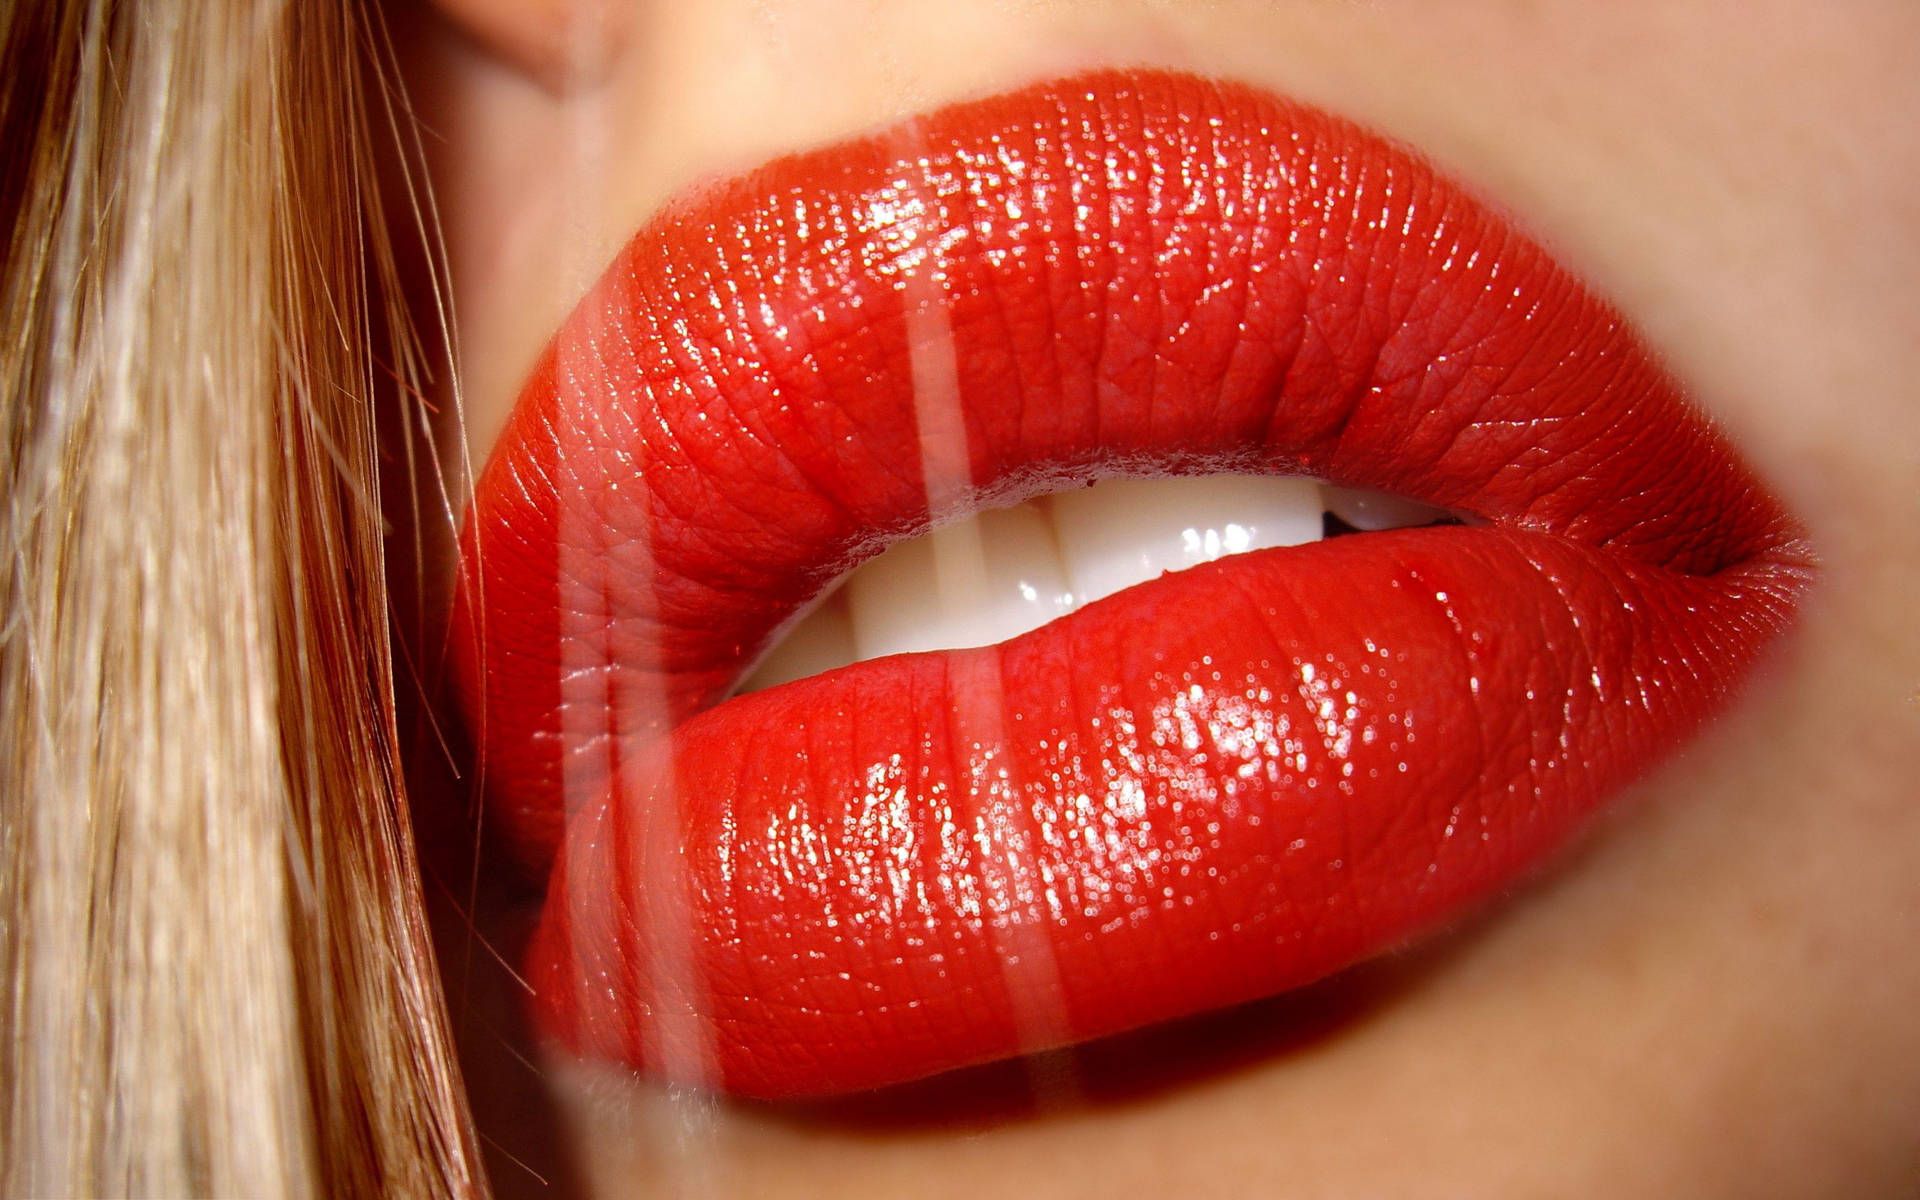 Close up of a woman's lips with red lipstick - Lips